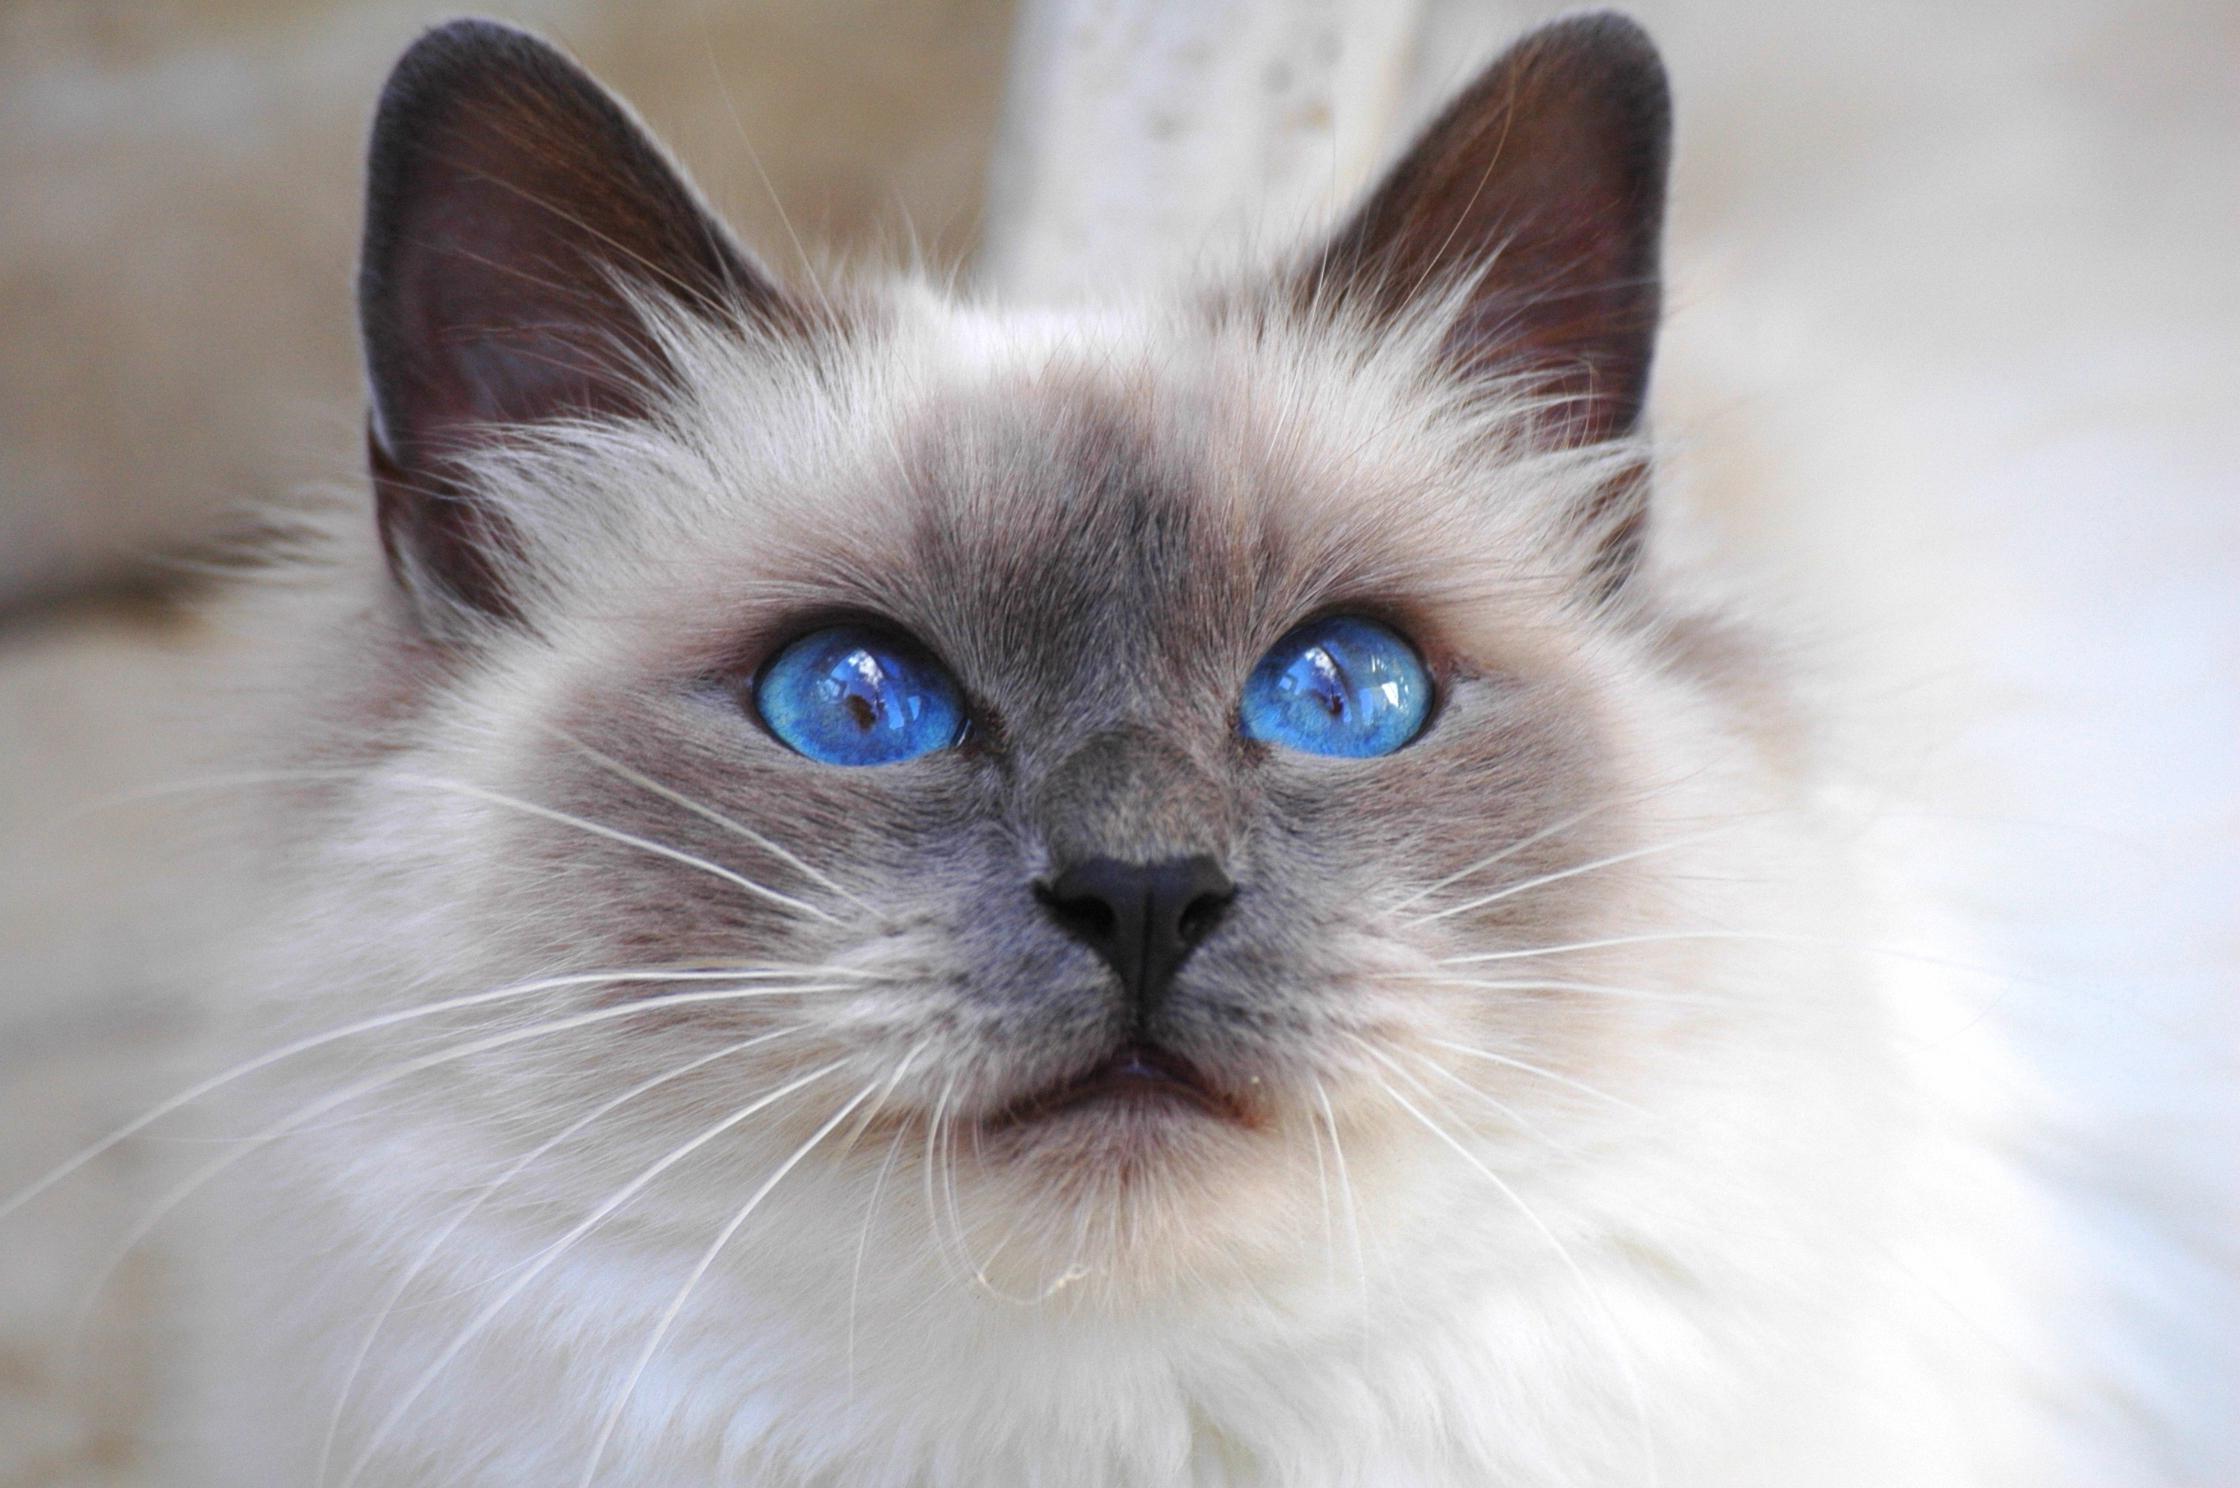 PC Wallpapers cats, animal, cat, blue eyes, eye, face, fluffy, gray